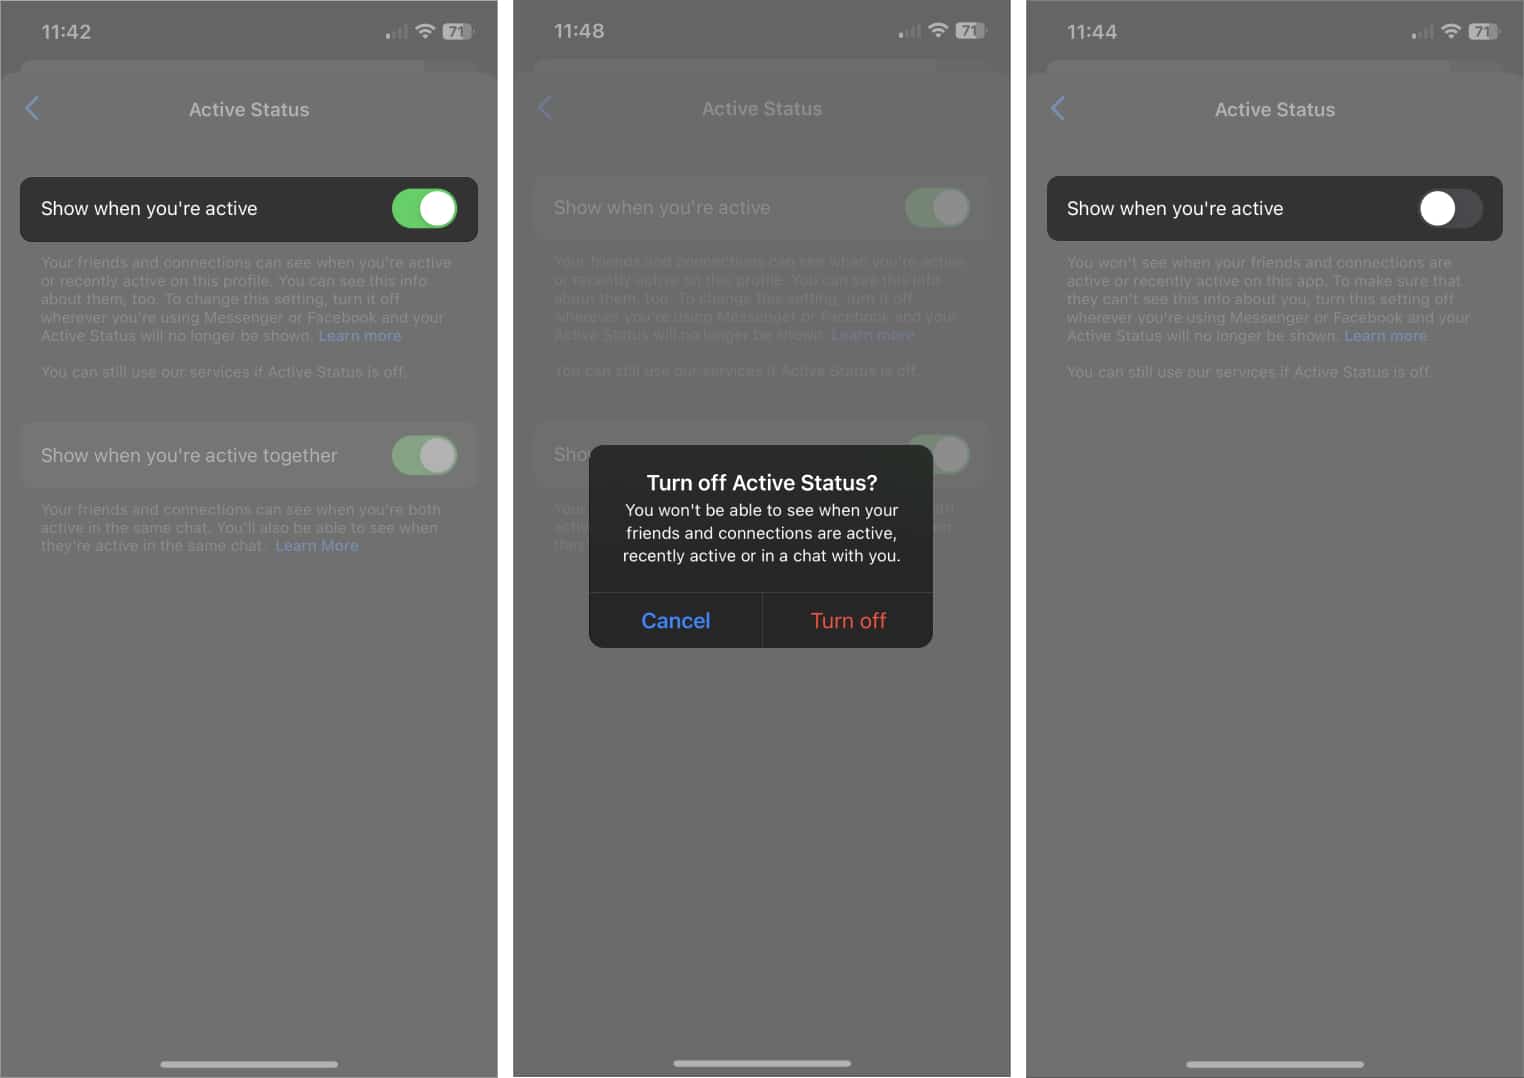 Turn your Active Status off from Messanger app on iPhone